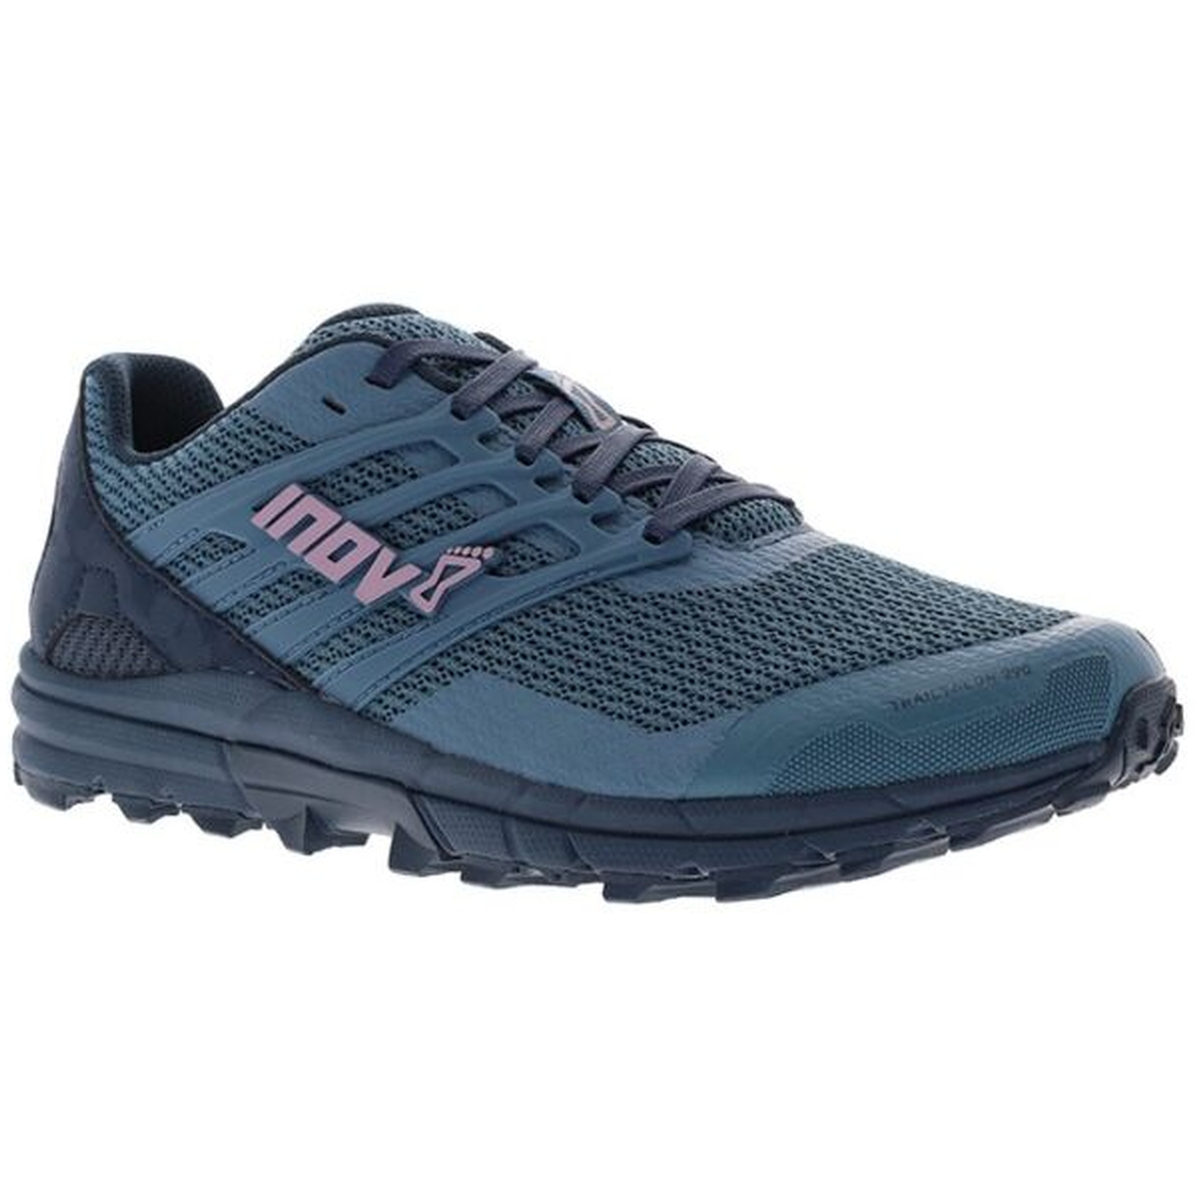 Picture of Inov-8 Trailtalon 290 V2 Women&#039;s Trail Running Shoes - blue/navy/pink